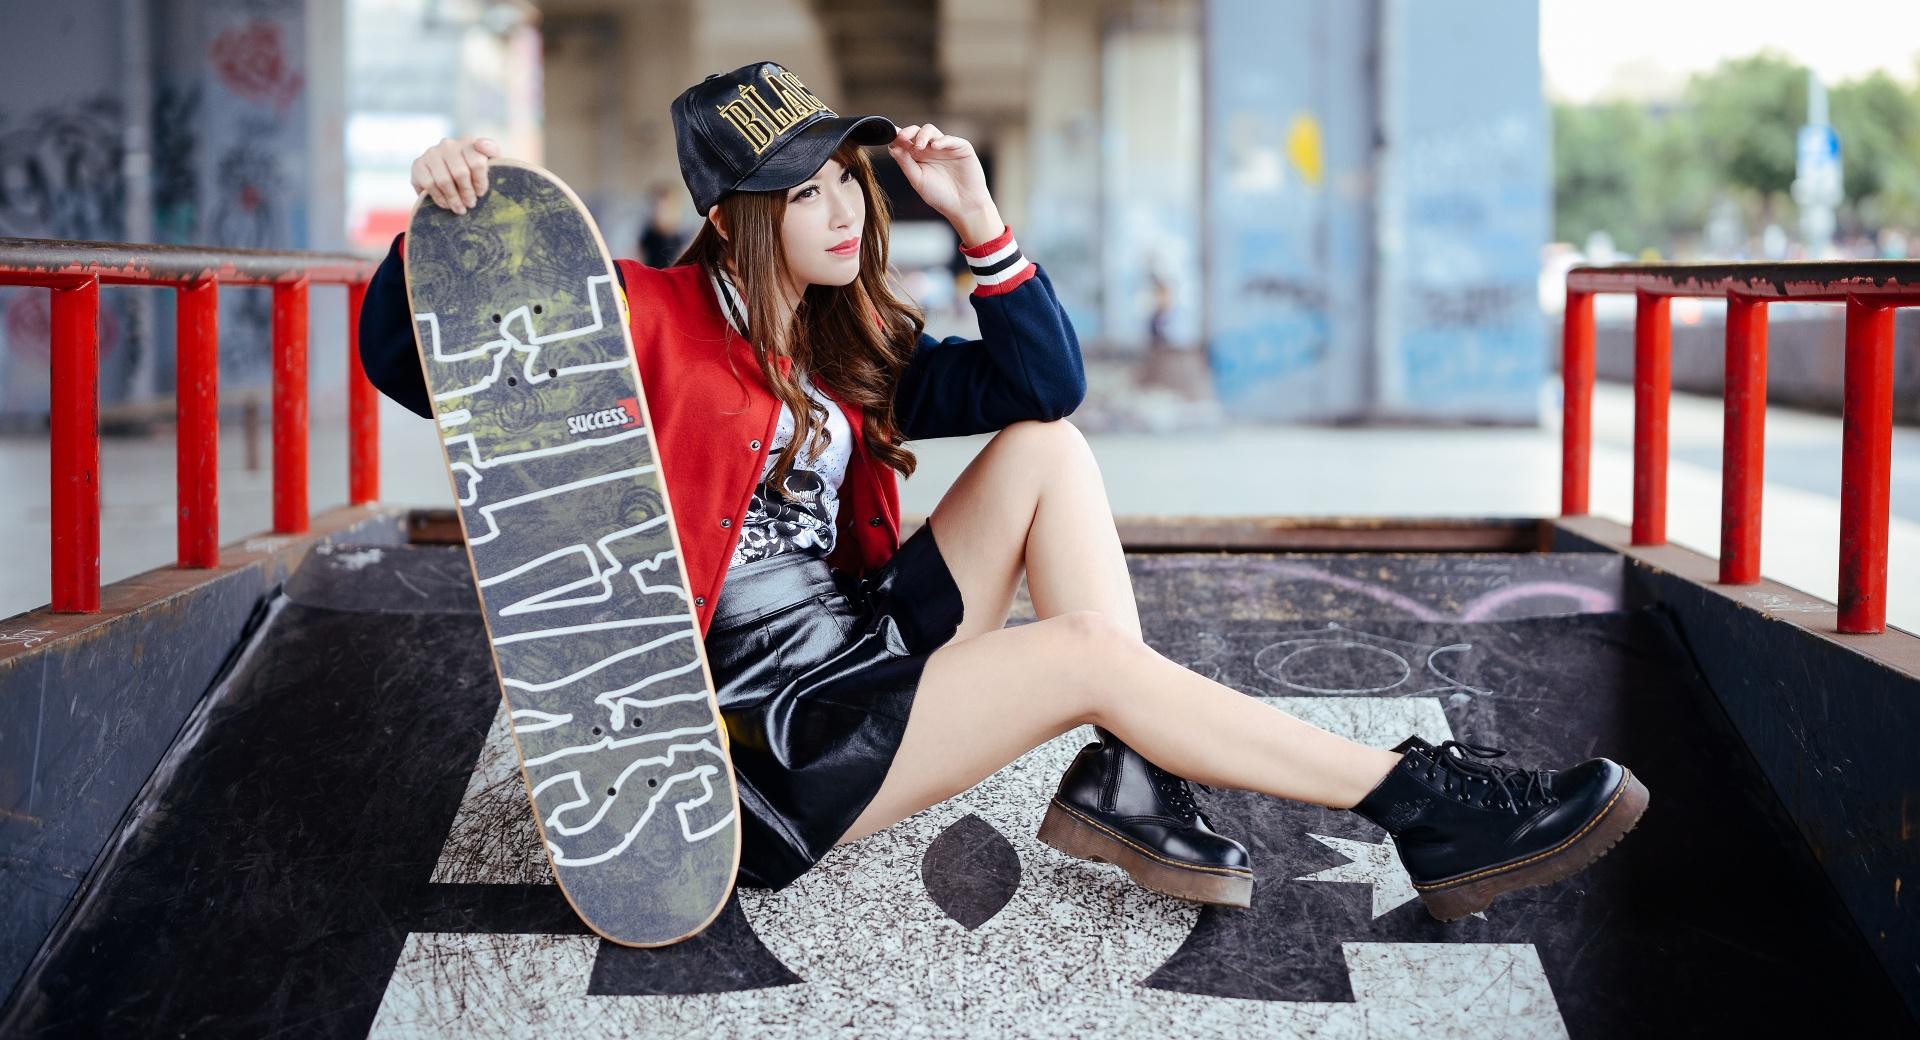 Girl Skateboarder Style wallpapers HD quality